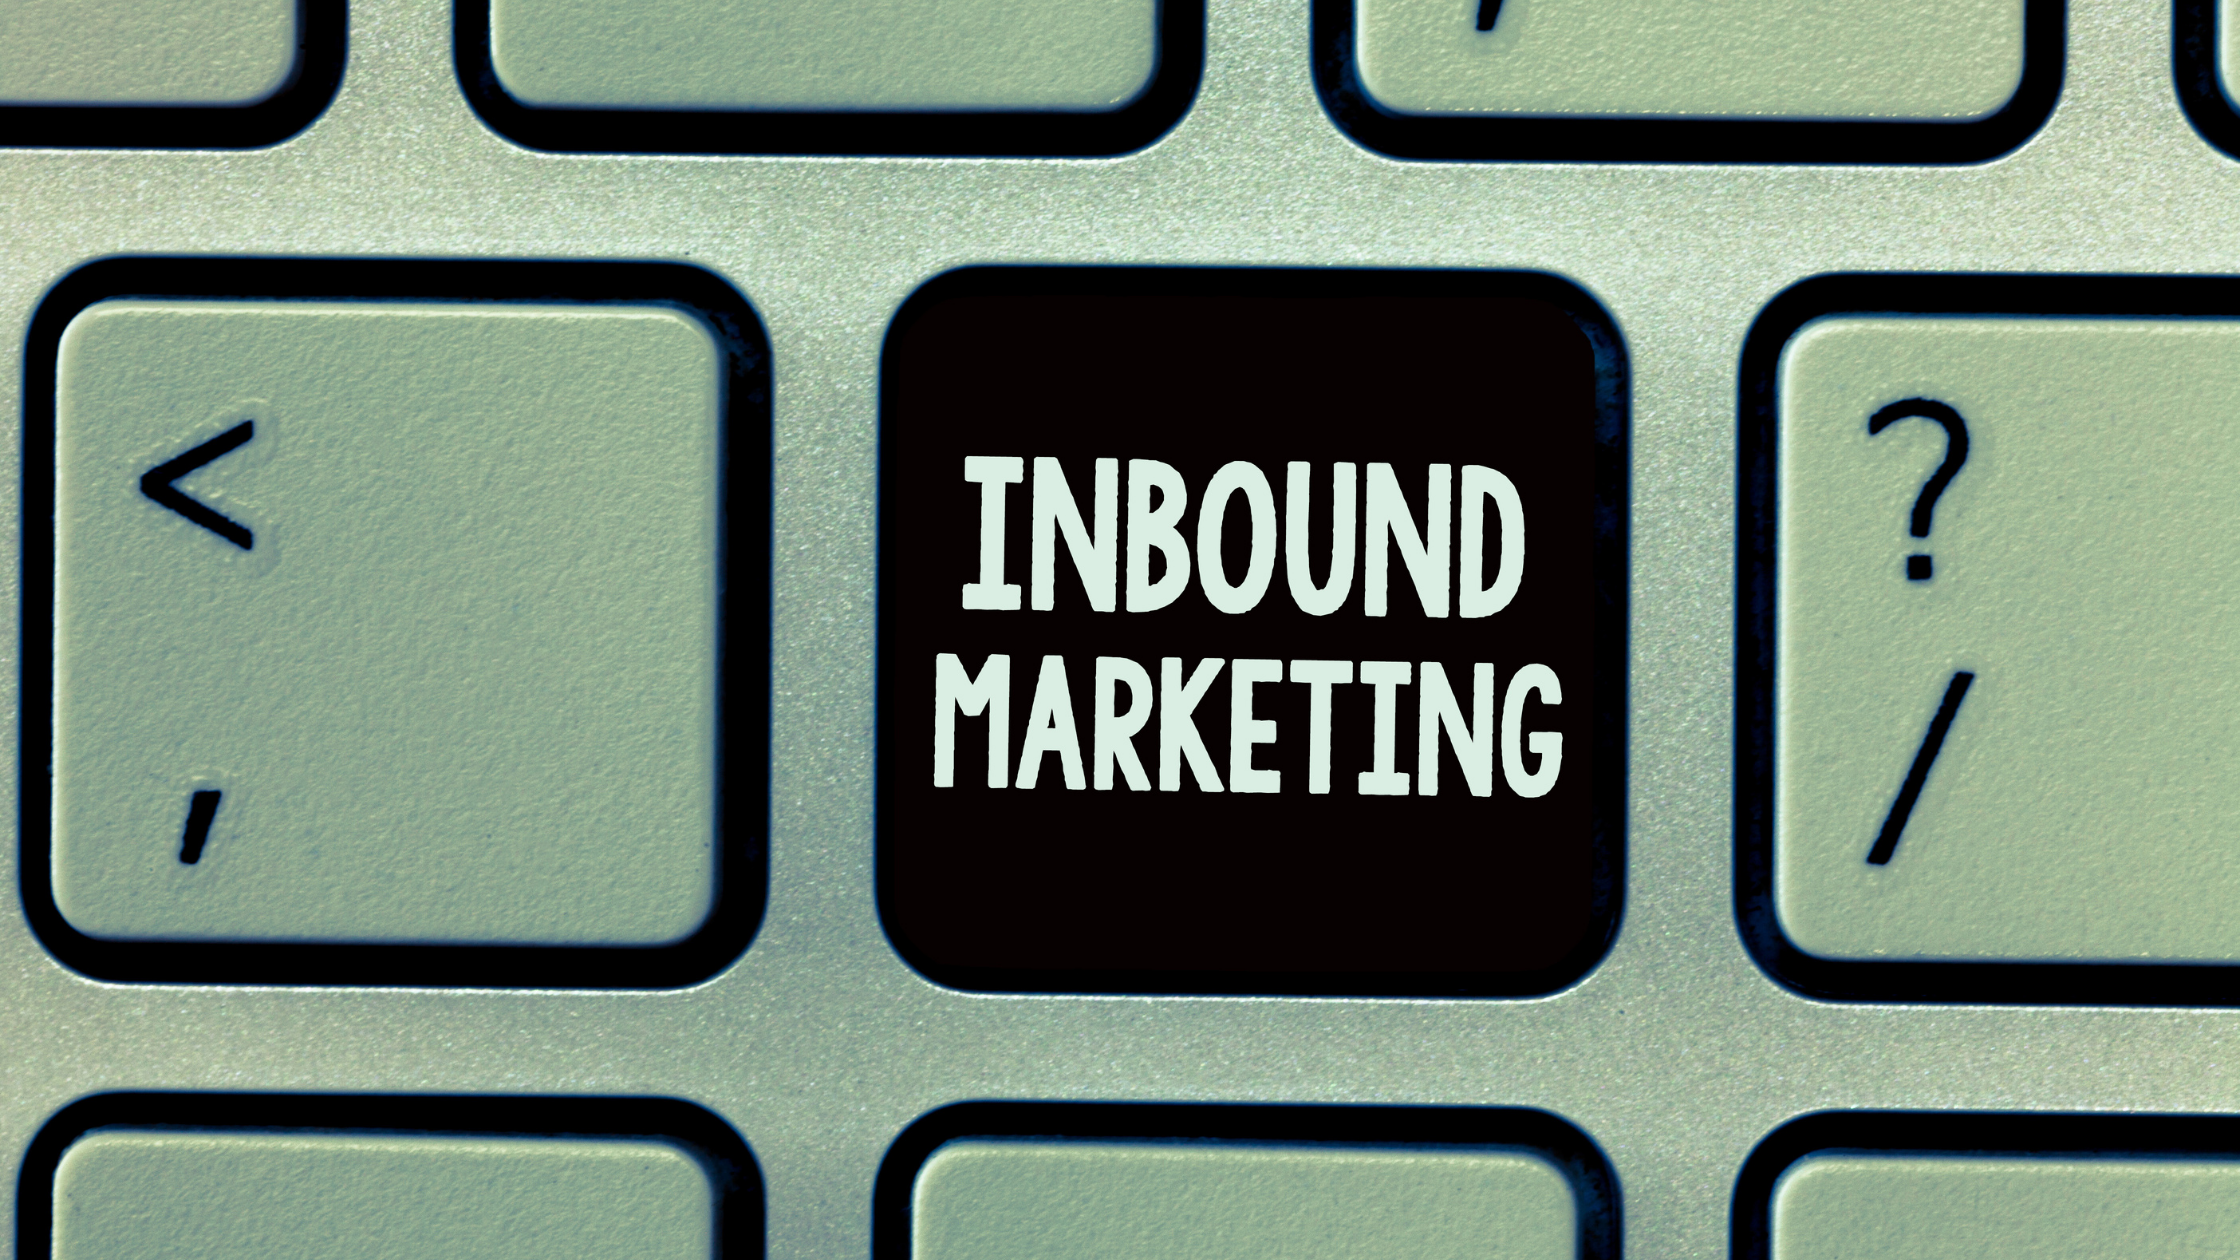 5 Inbound Education Marketing Ideas for Your School